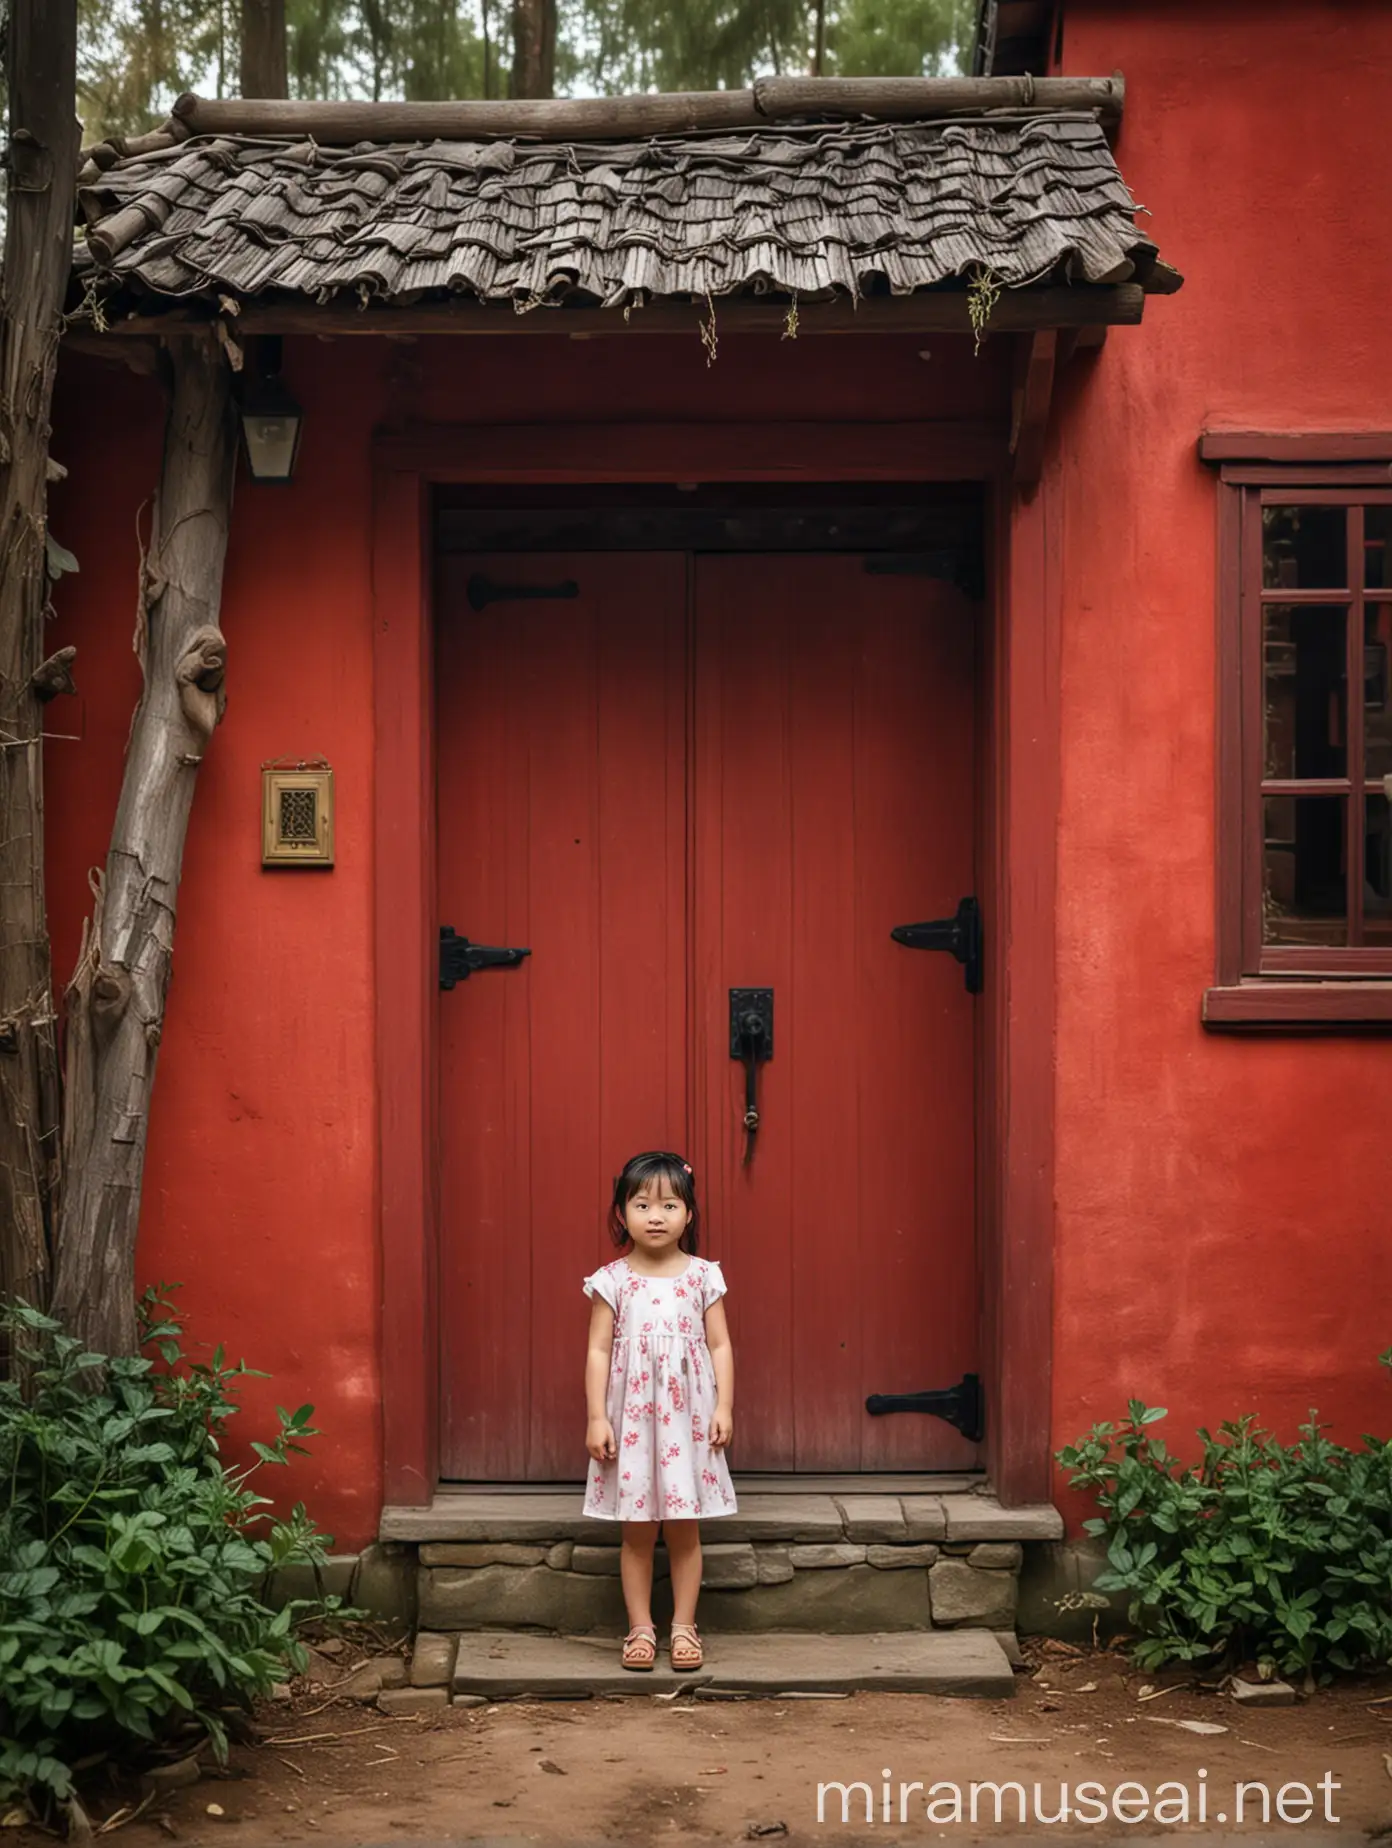 Young Chinese Girl Standing by Red Cottage in Enchanted Forest